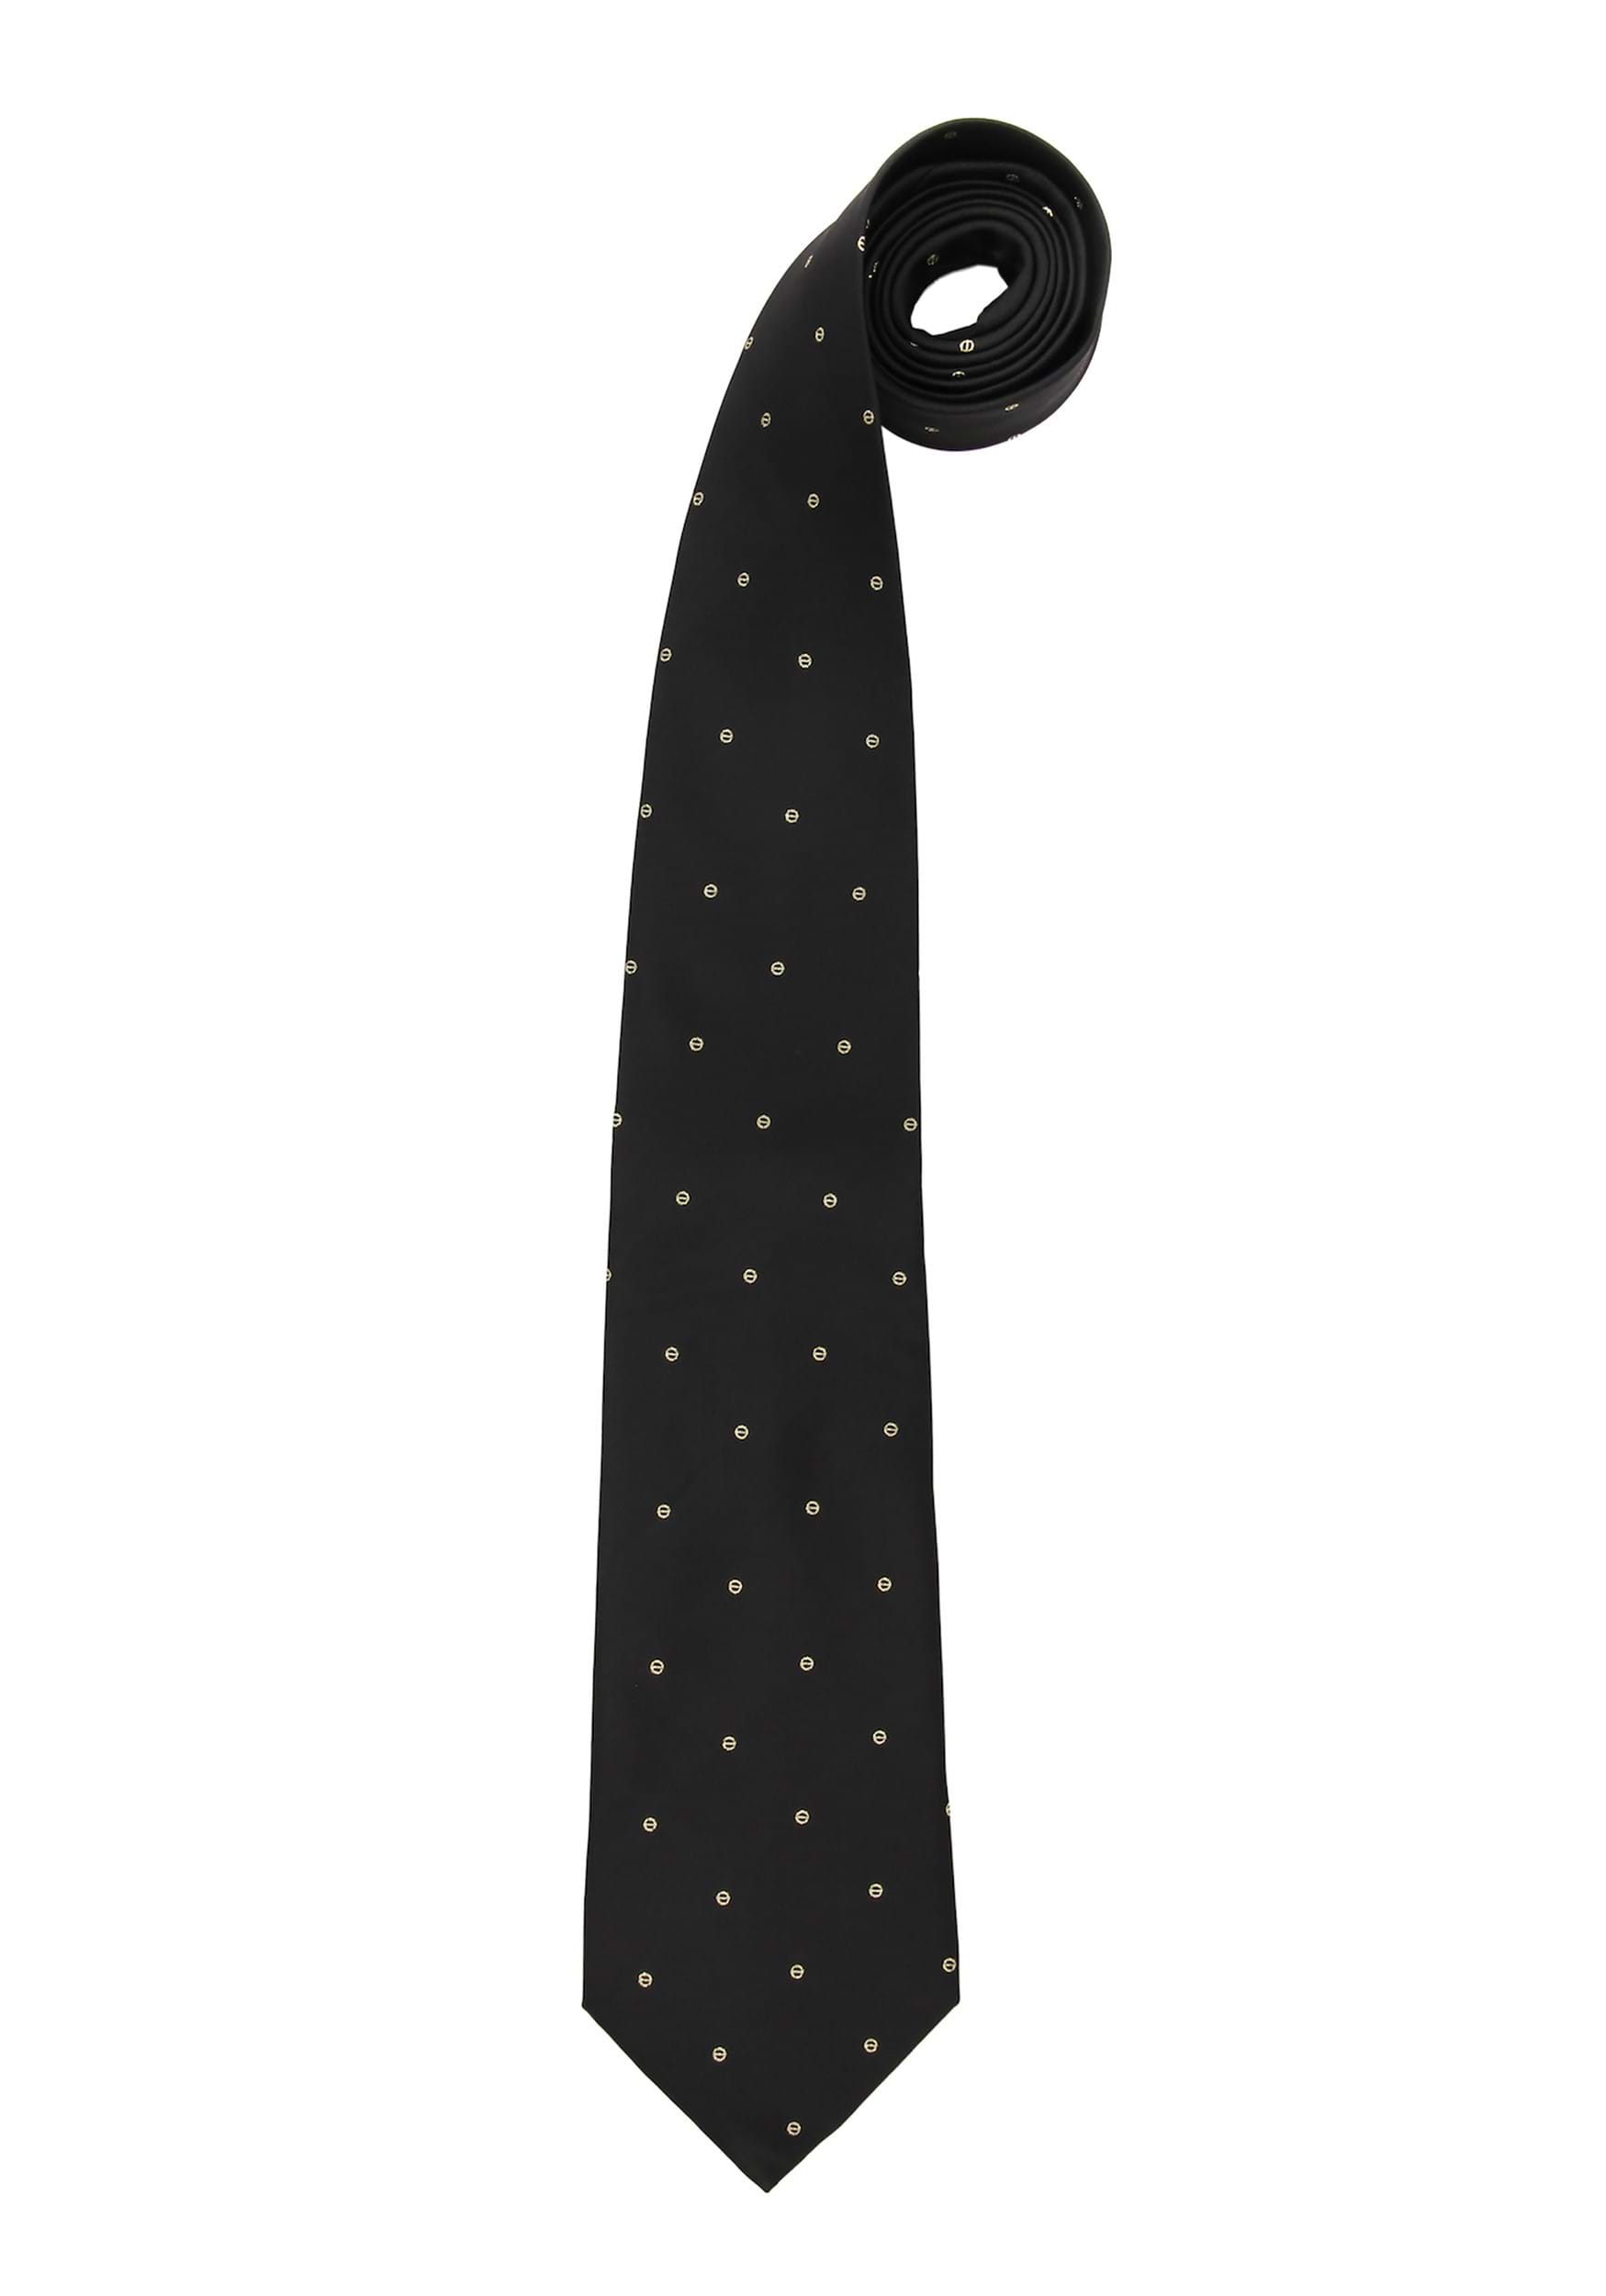 Percival Graves Necktie from Fantastic Beasts and Where to Find Them